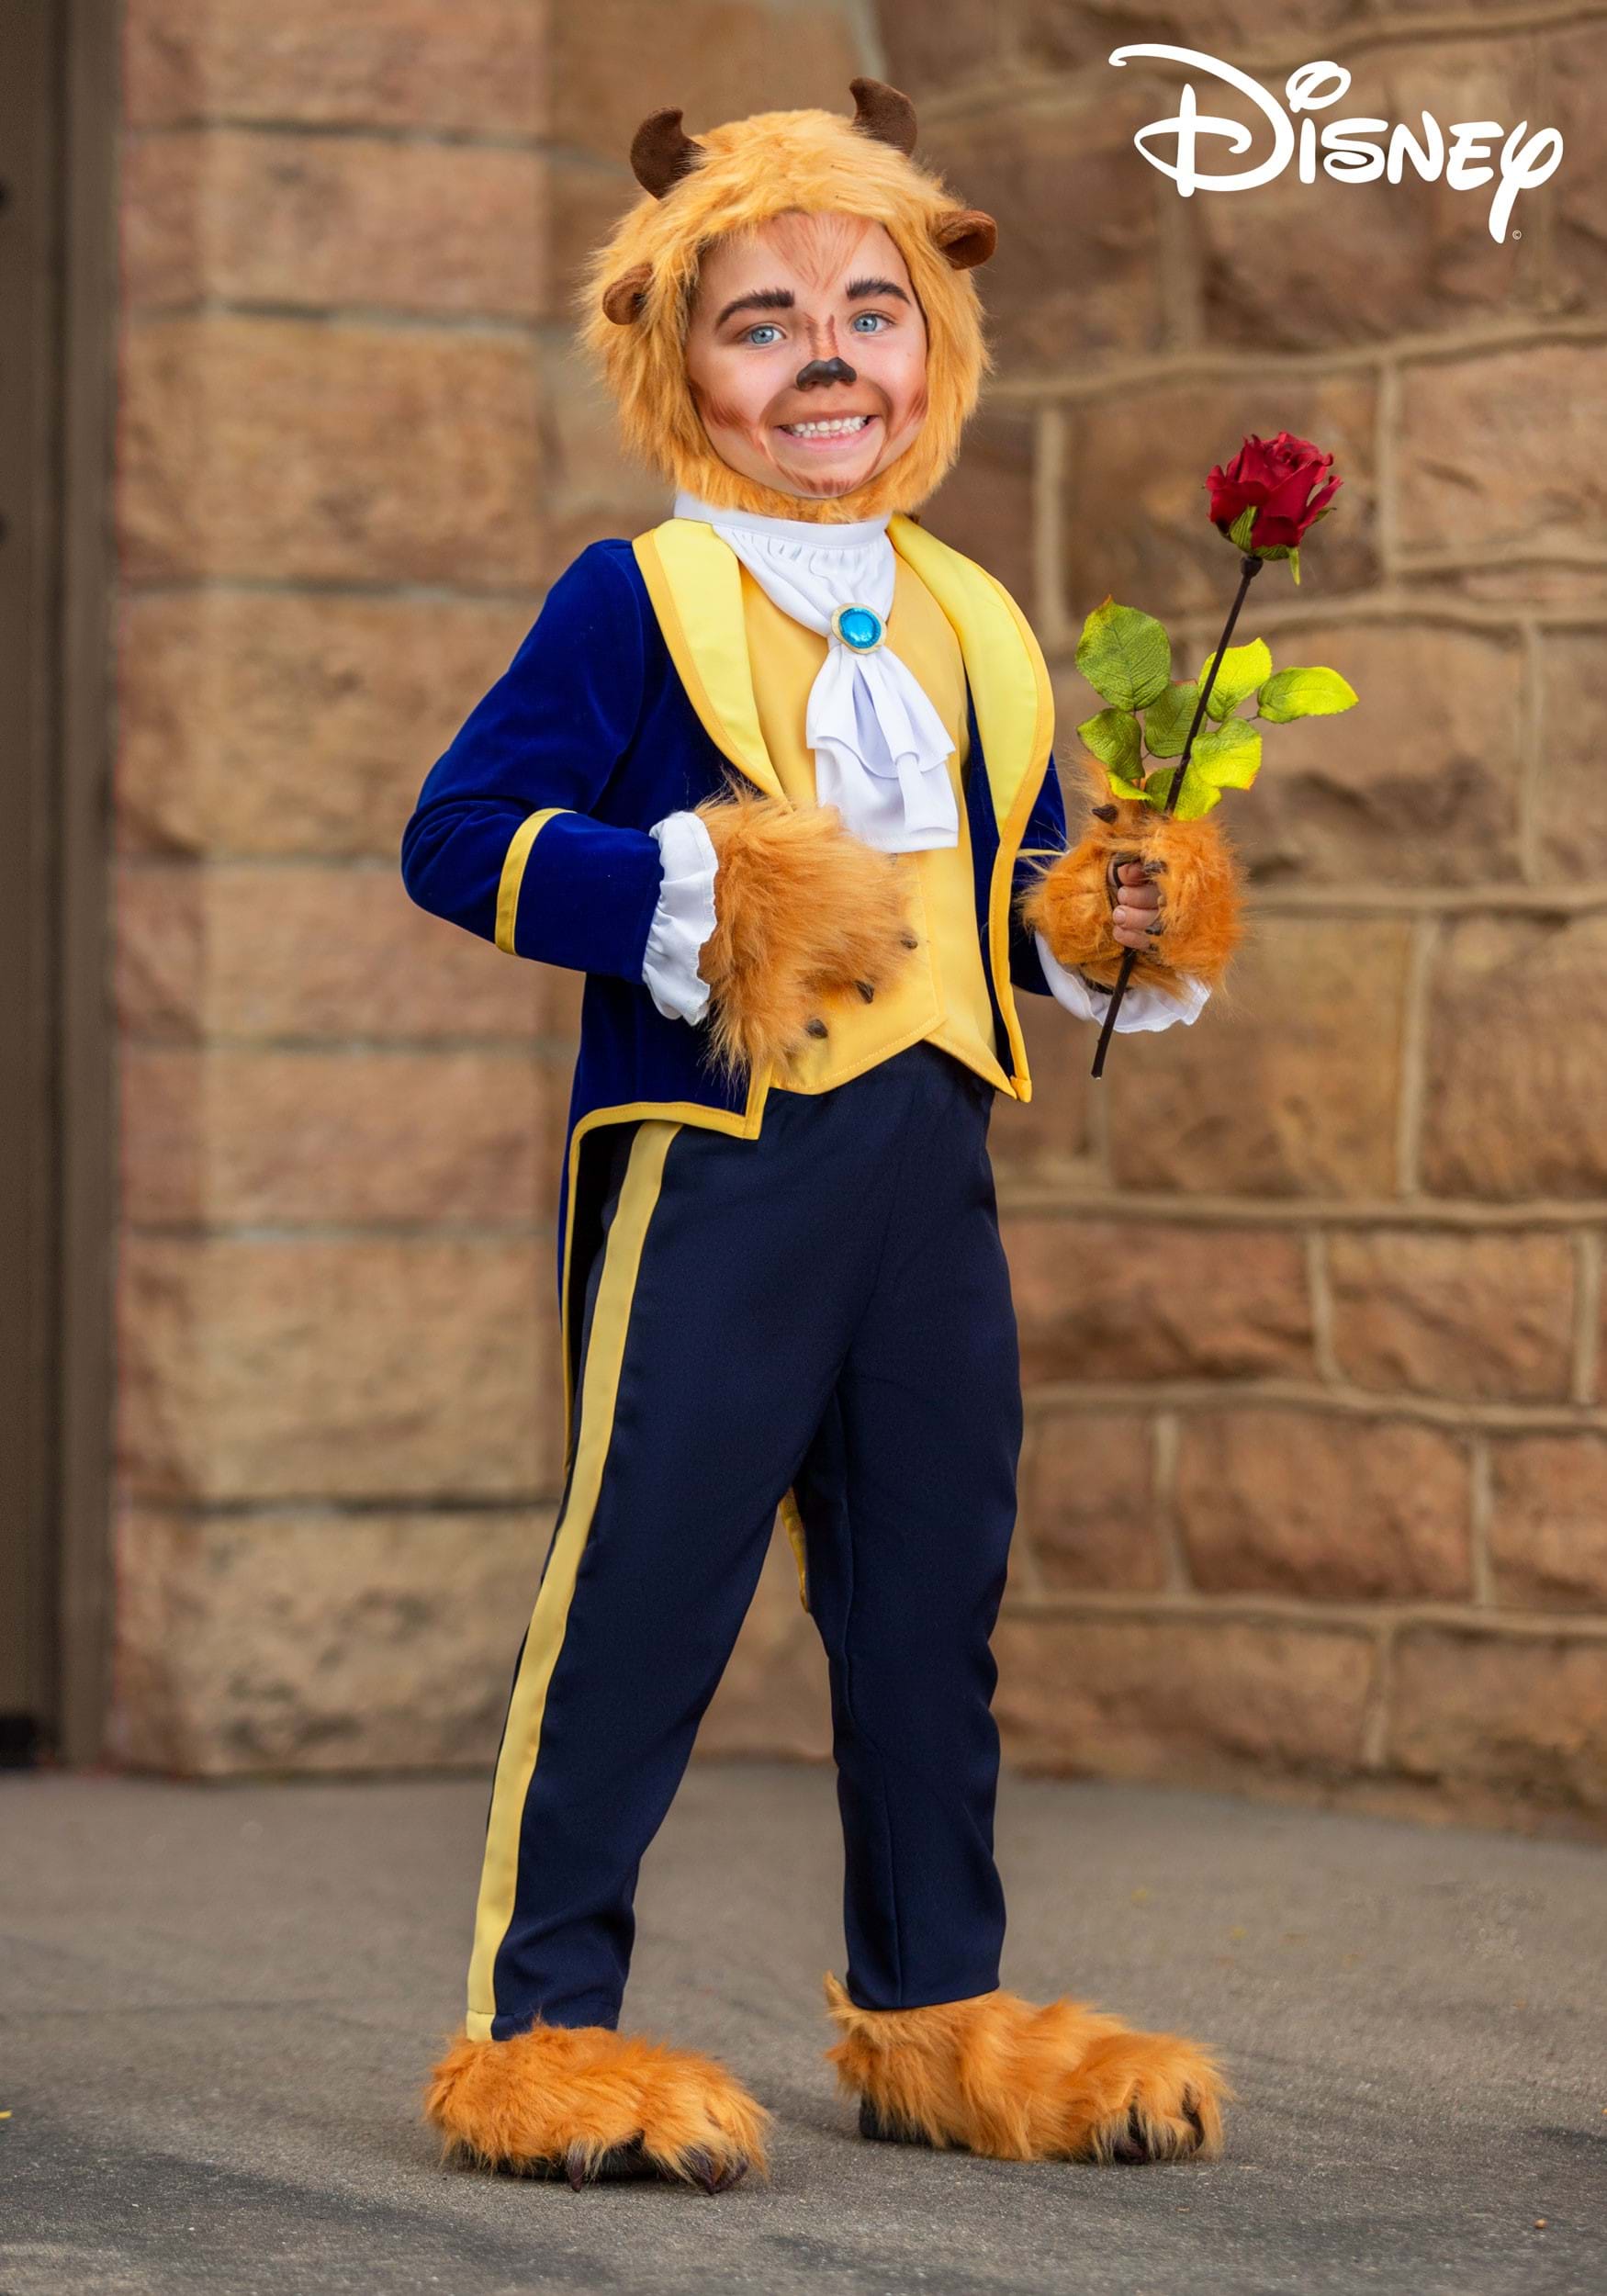 https://images.fun.com/products/69969/1-1/beauty-and-the-beast-toddler-beast-costume-2.jpg